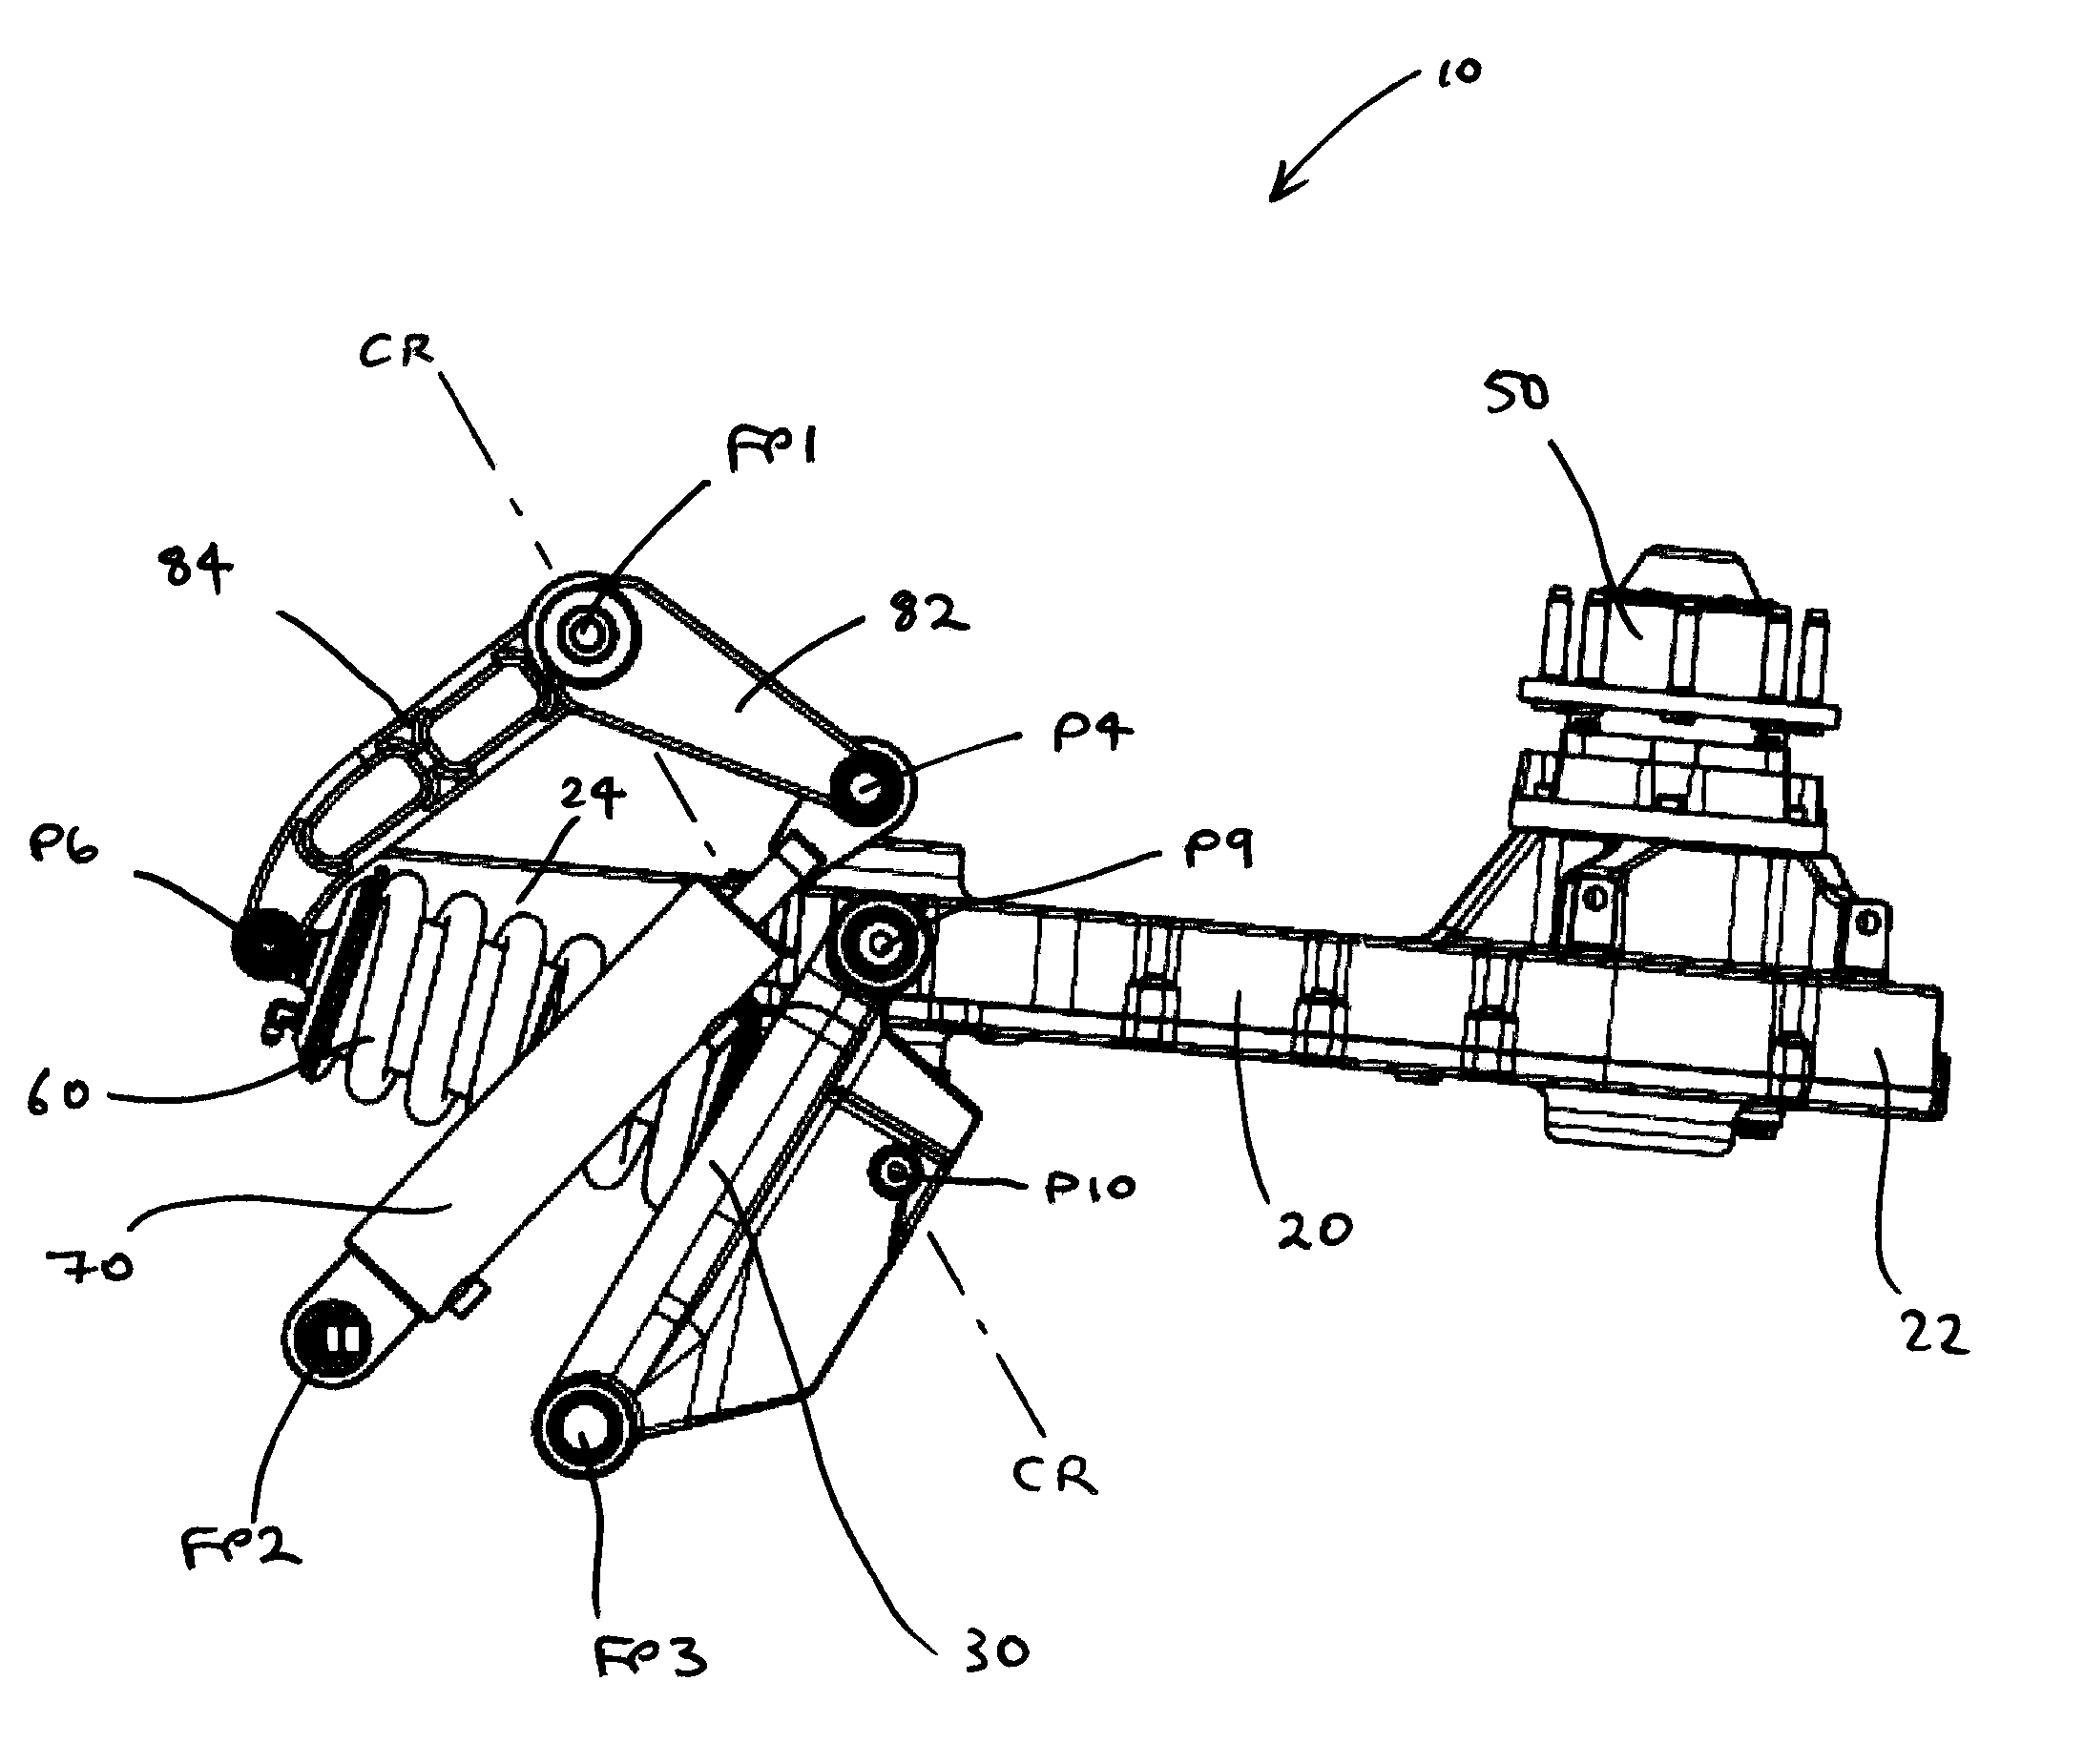 A Retractable Wheel Assembly for an Amphibian